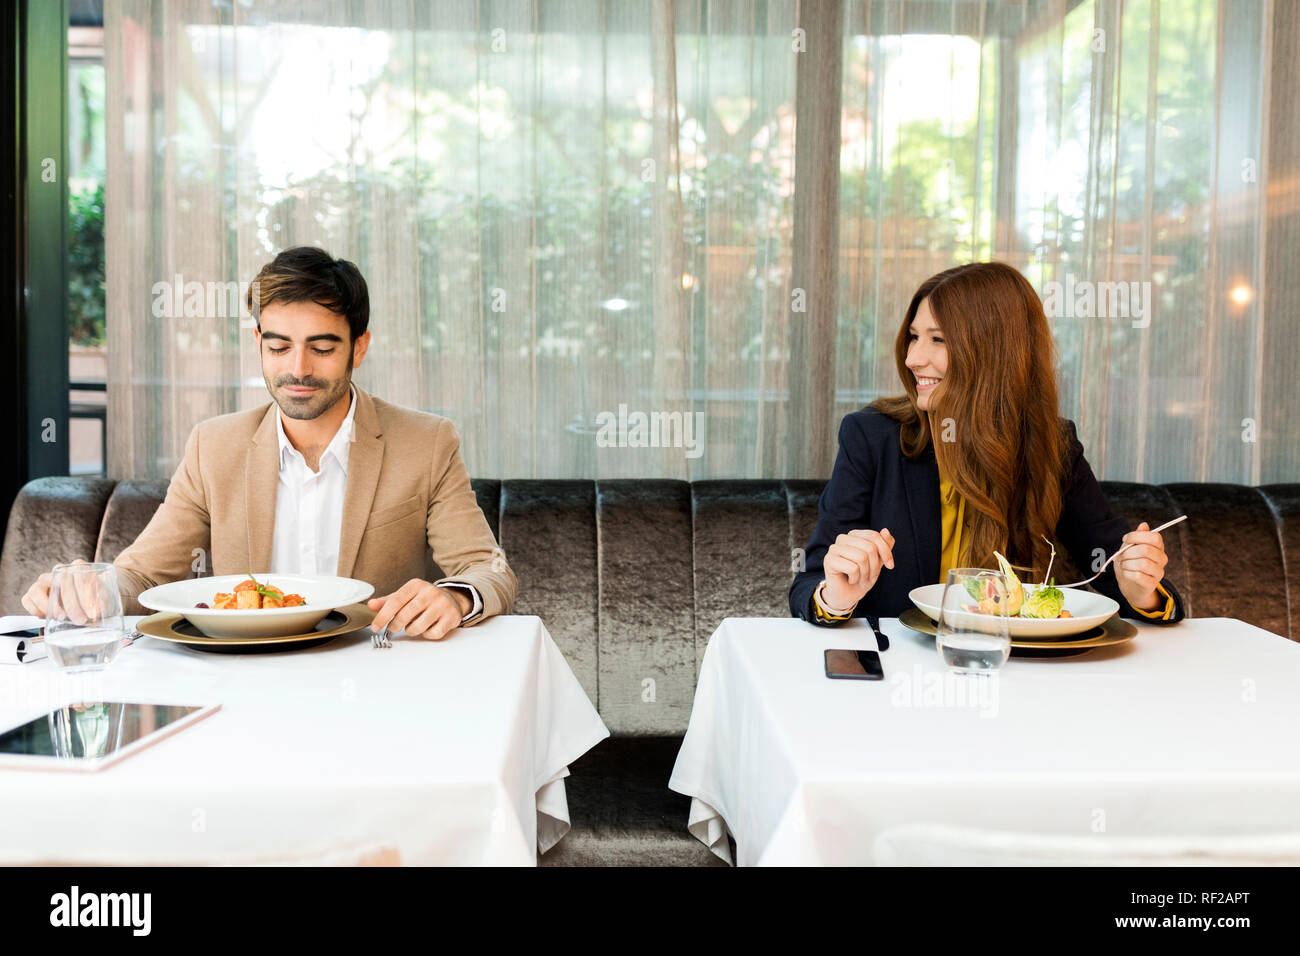 Smiling woman looking at man in a restaurant Stock Photo